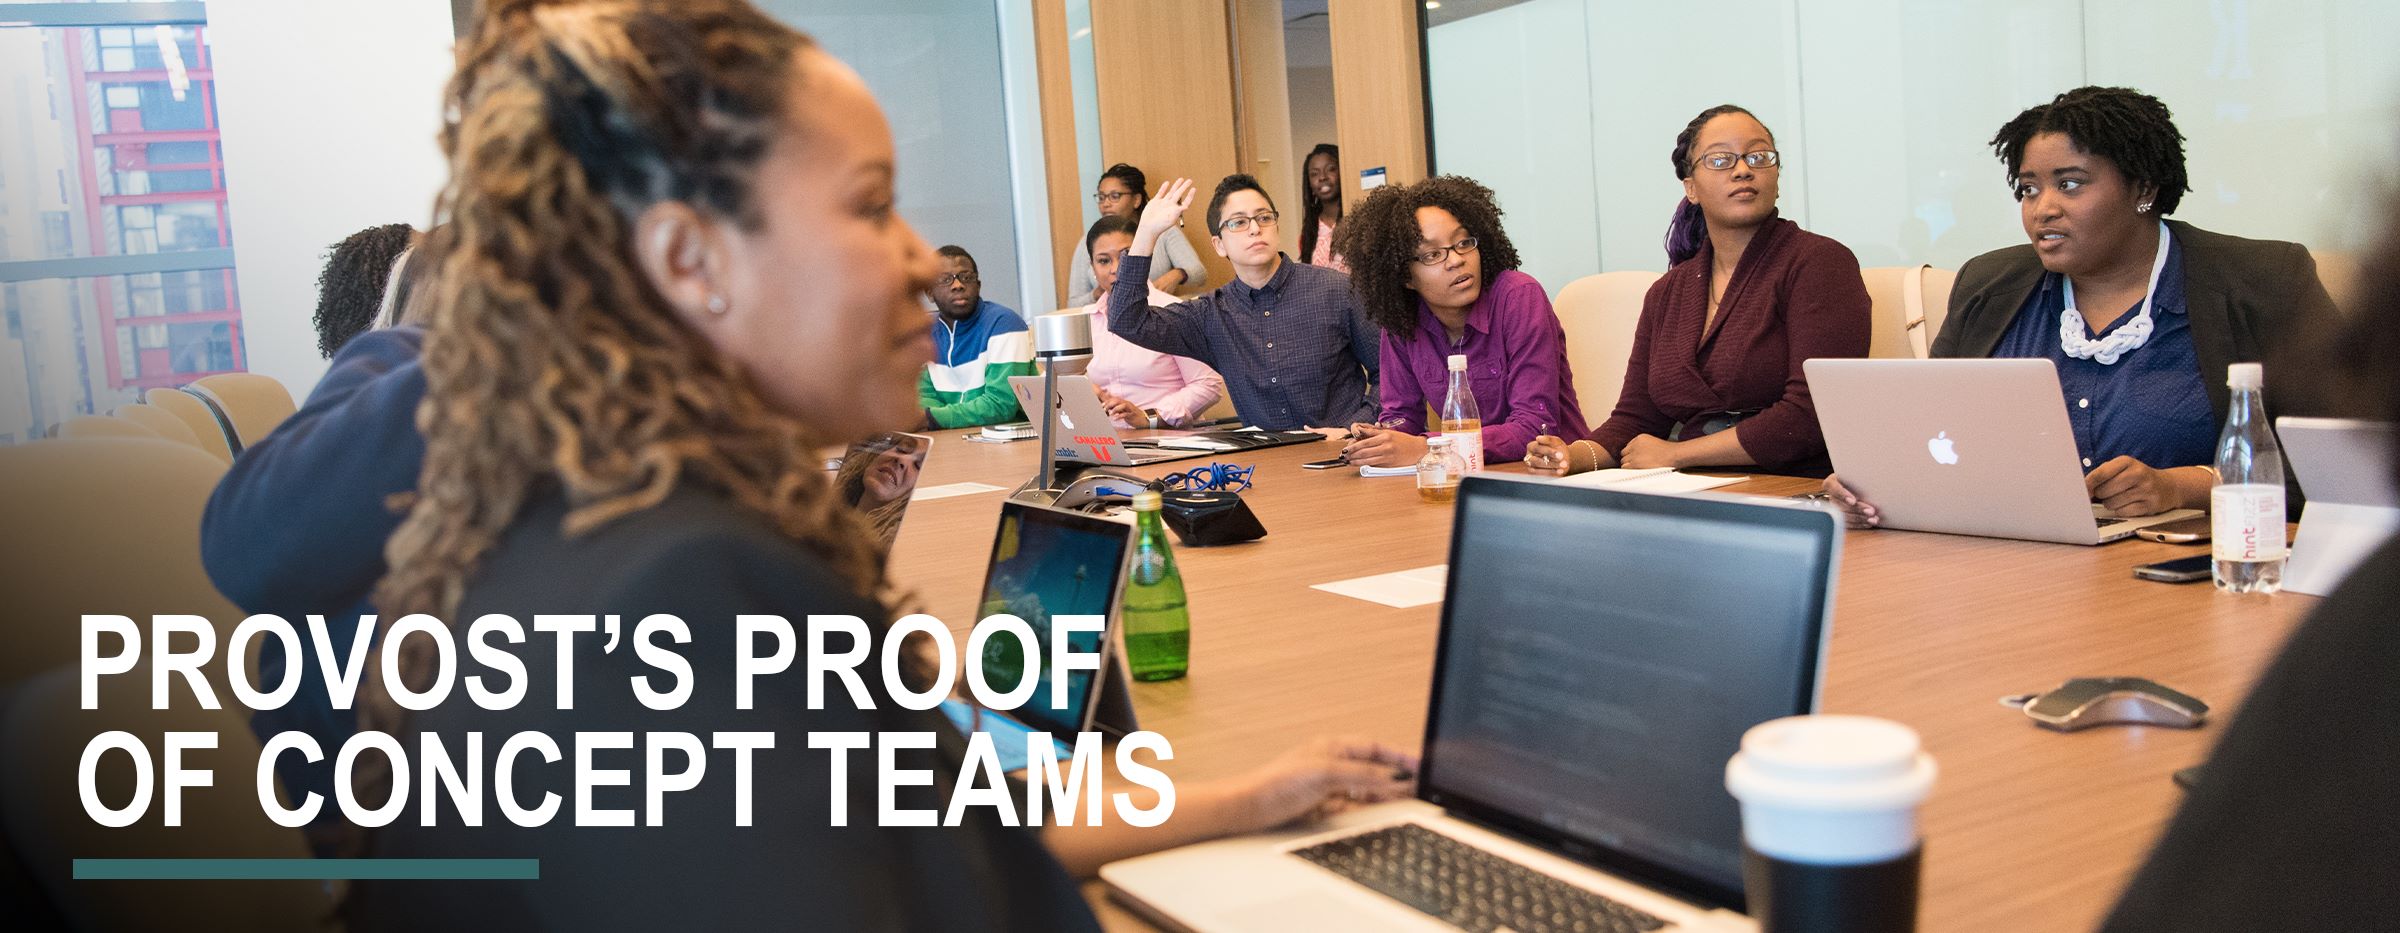 Provost's Proof of Concept Fund Teams